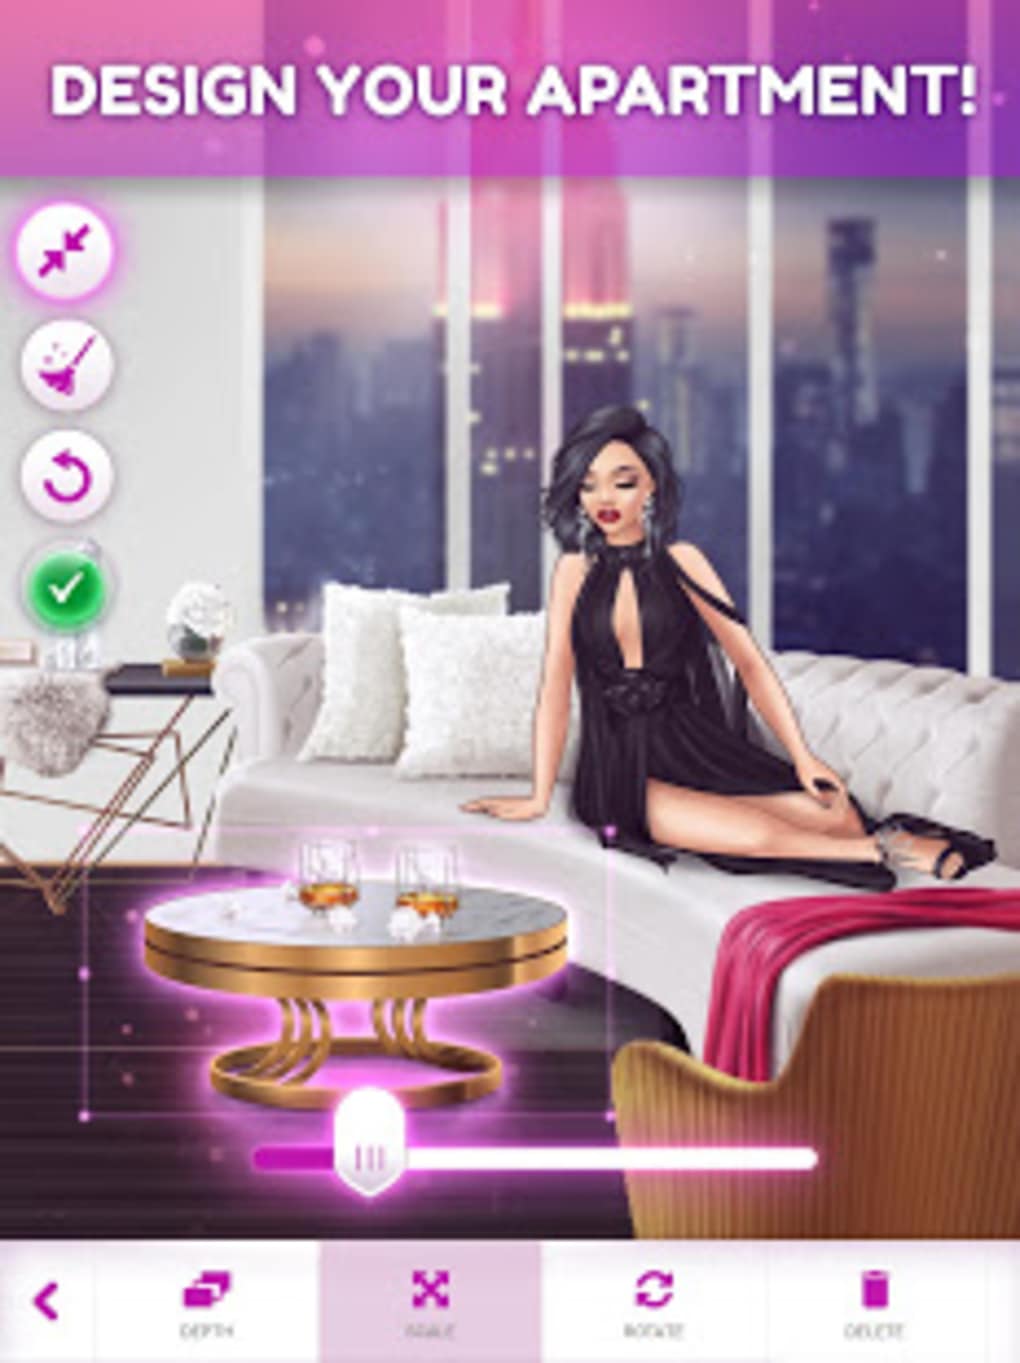 Pop Style Lady APK for Android Download